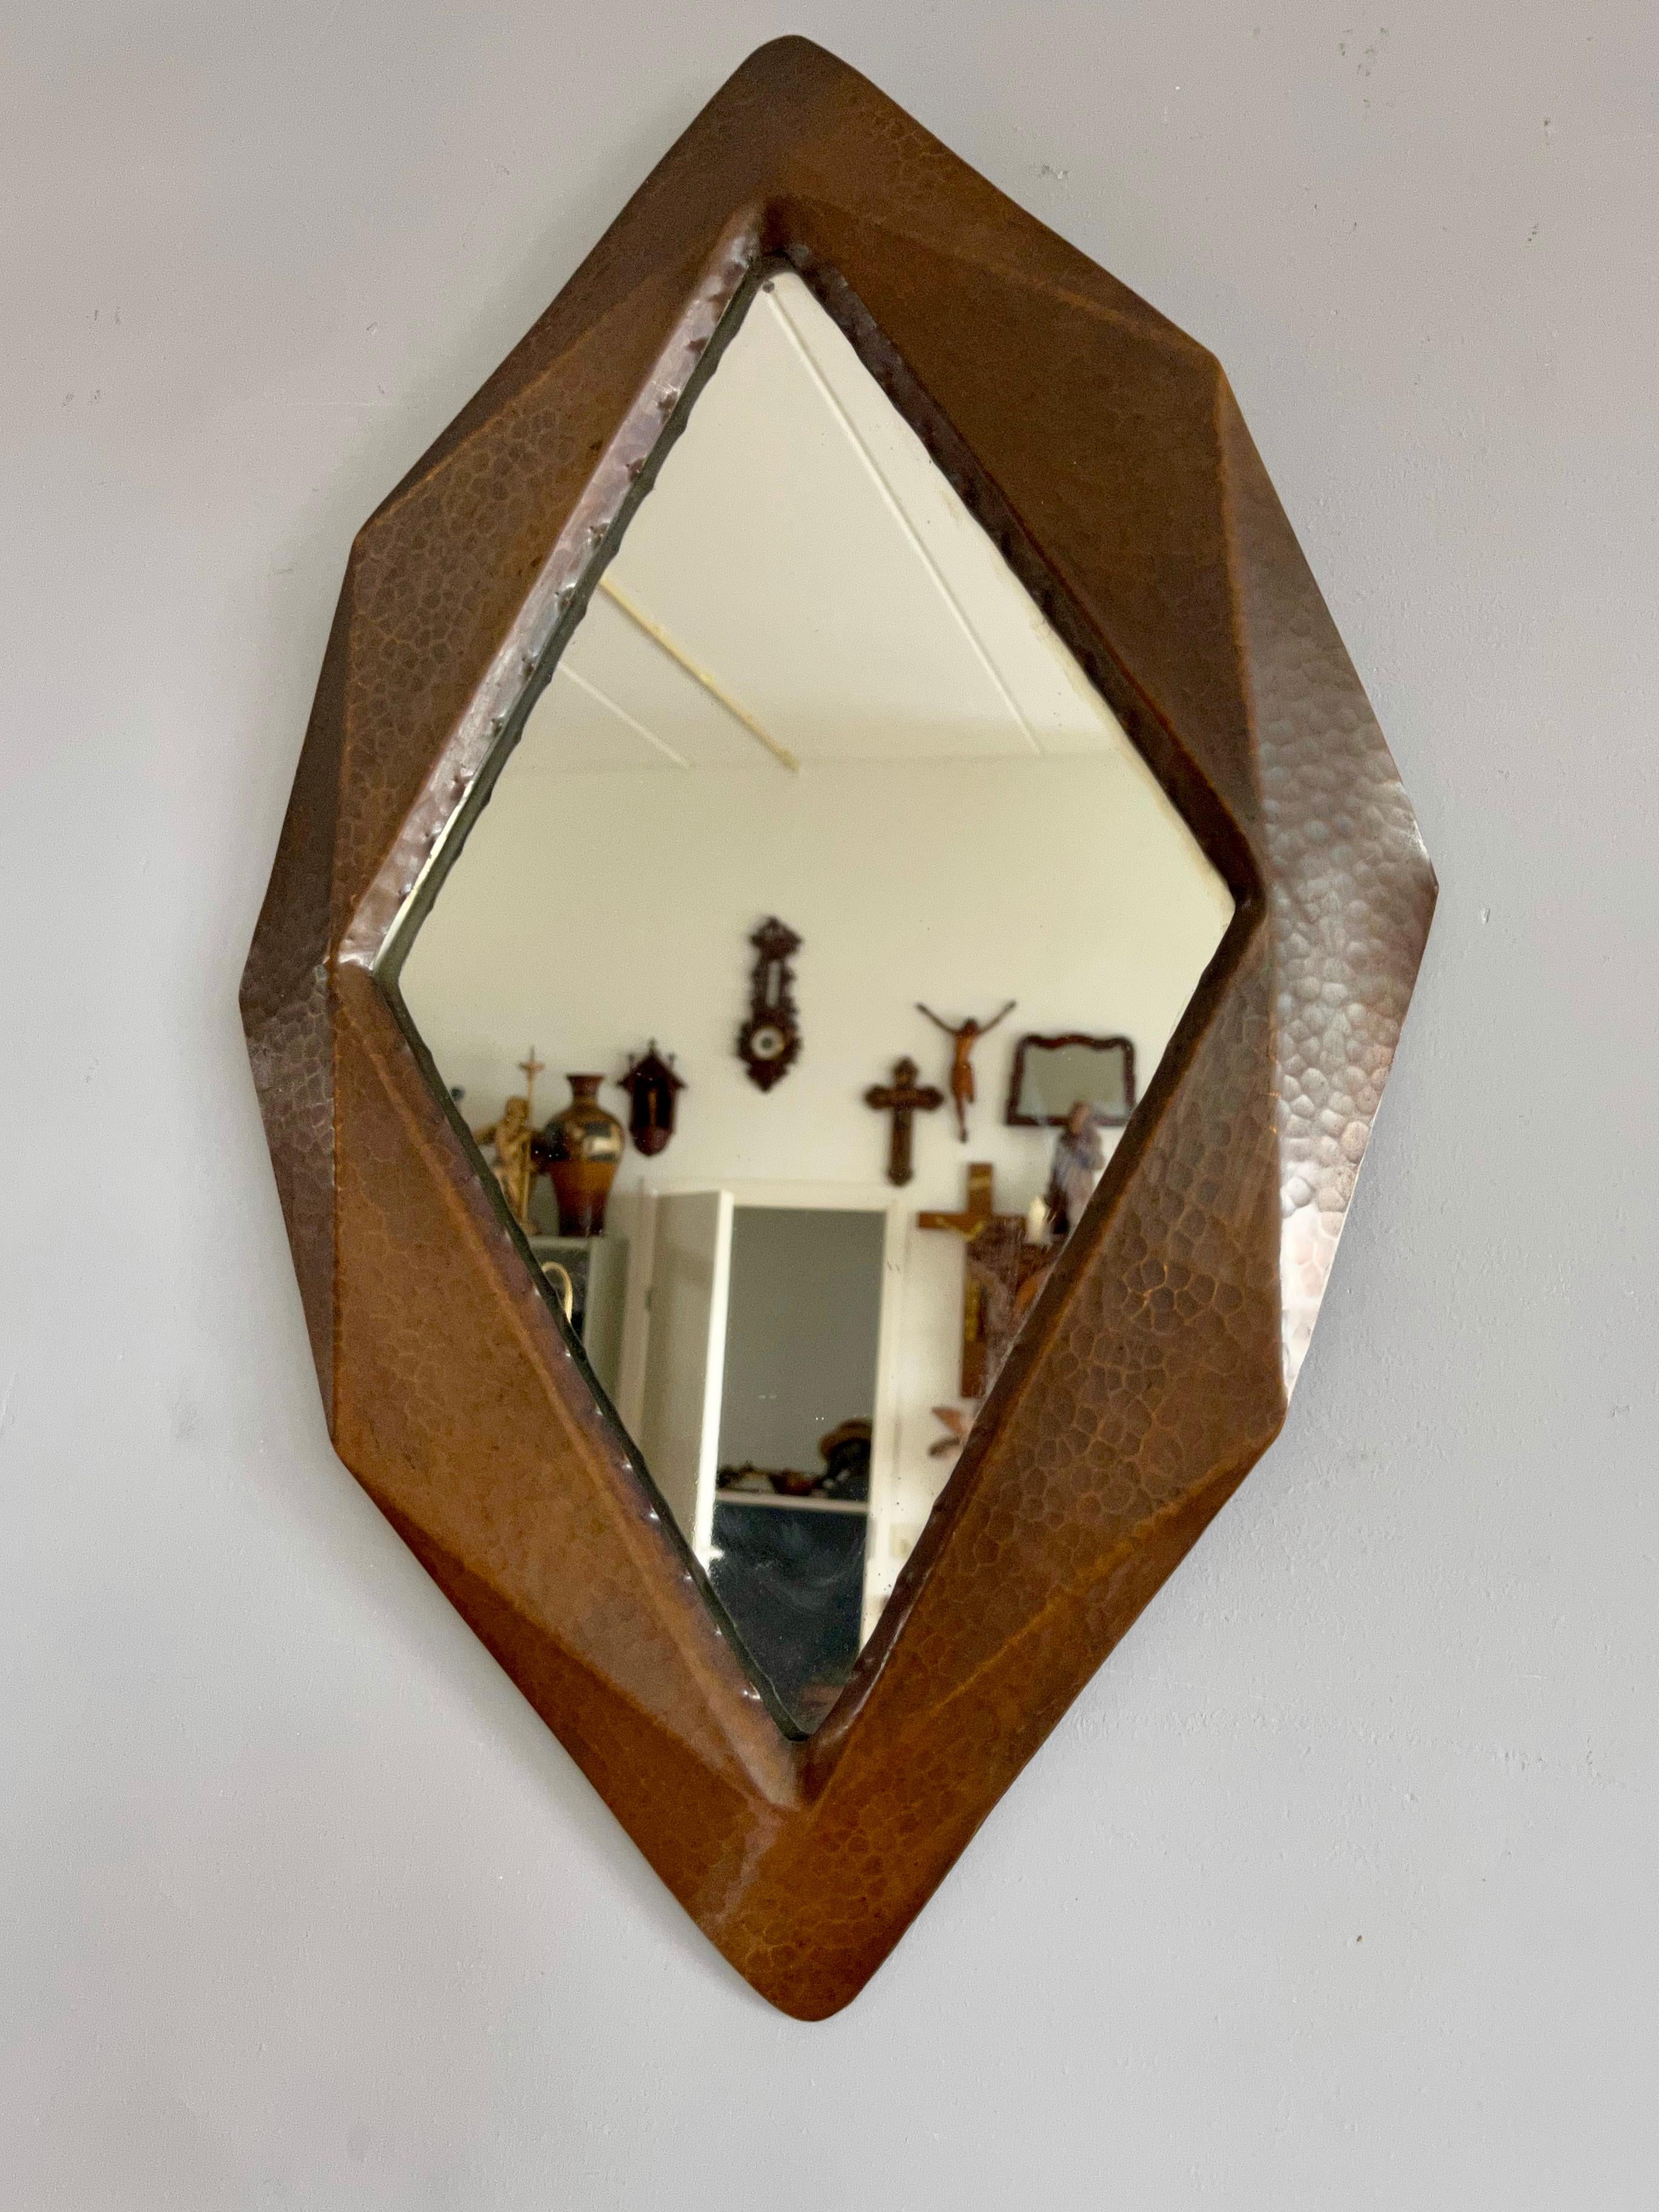 Unique Arts & Crafts Geometric, Cubist Shape, Crafted Copper Hallway Wall Mirror For Sale 3